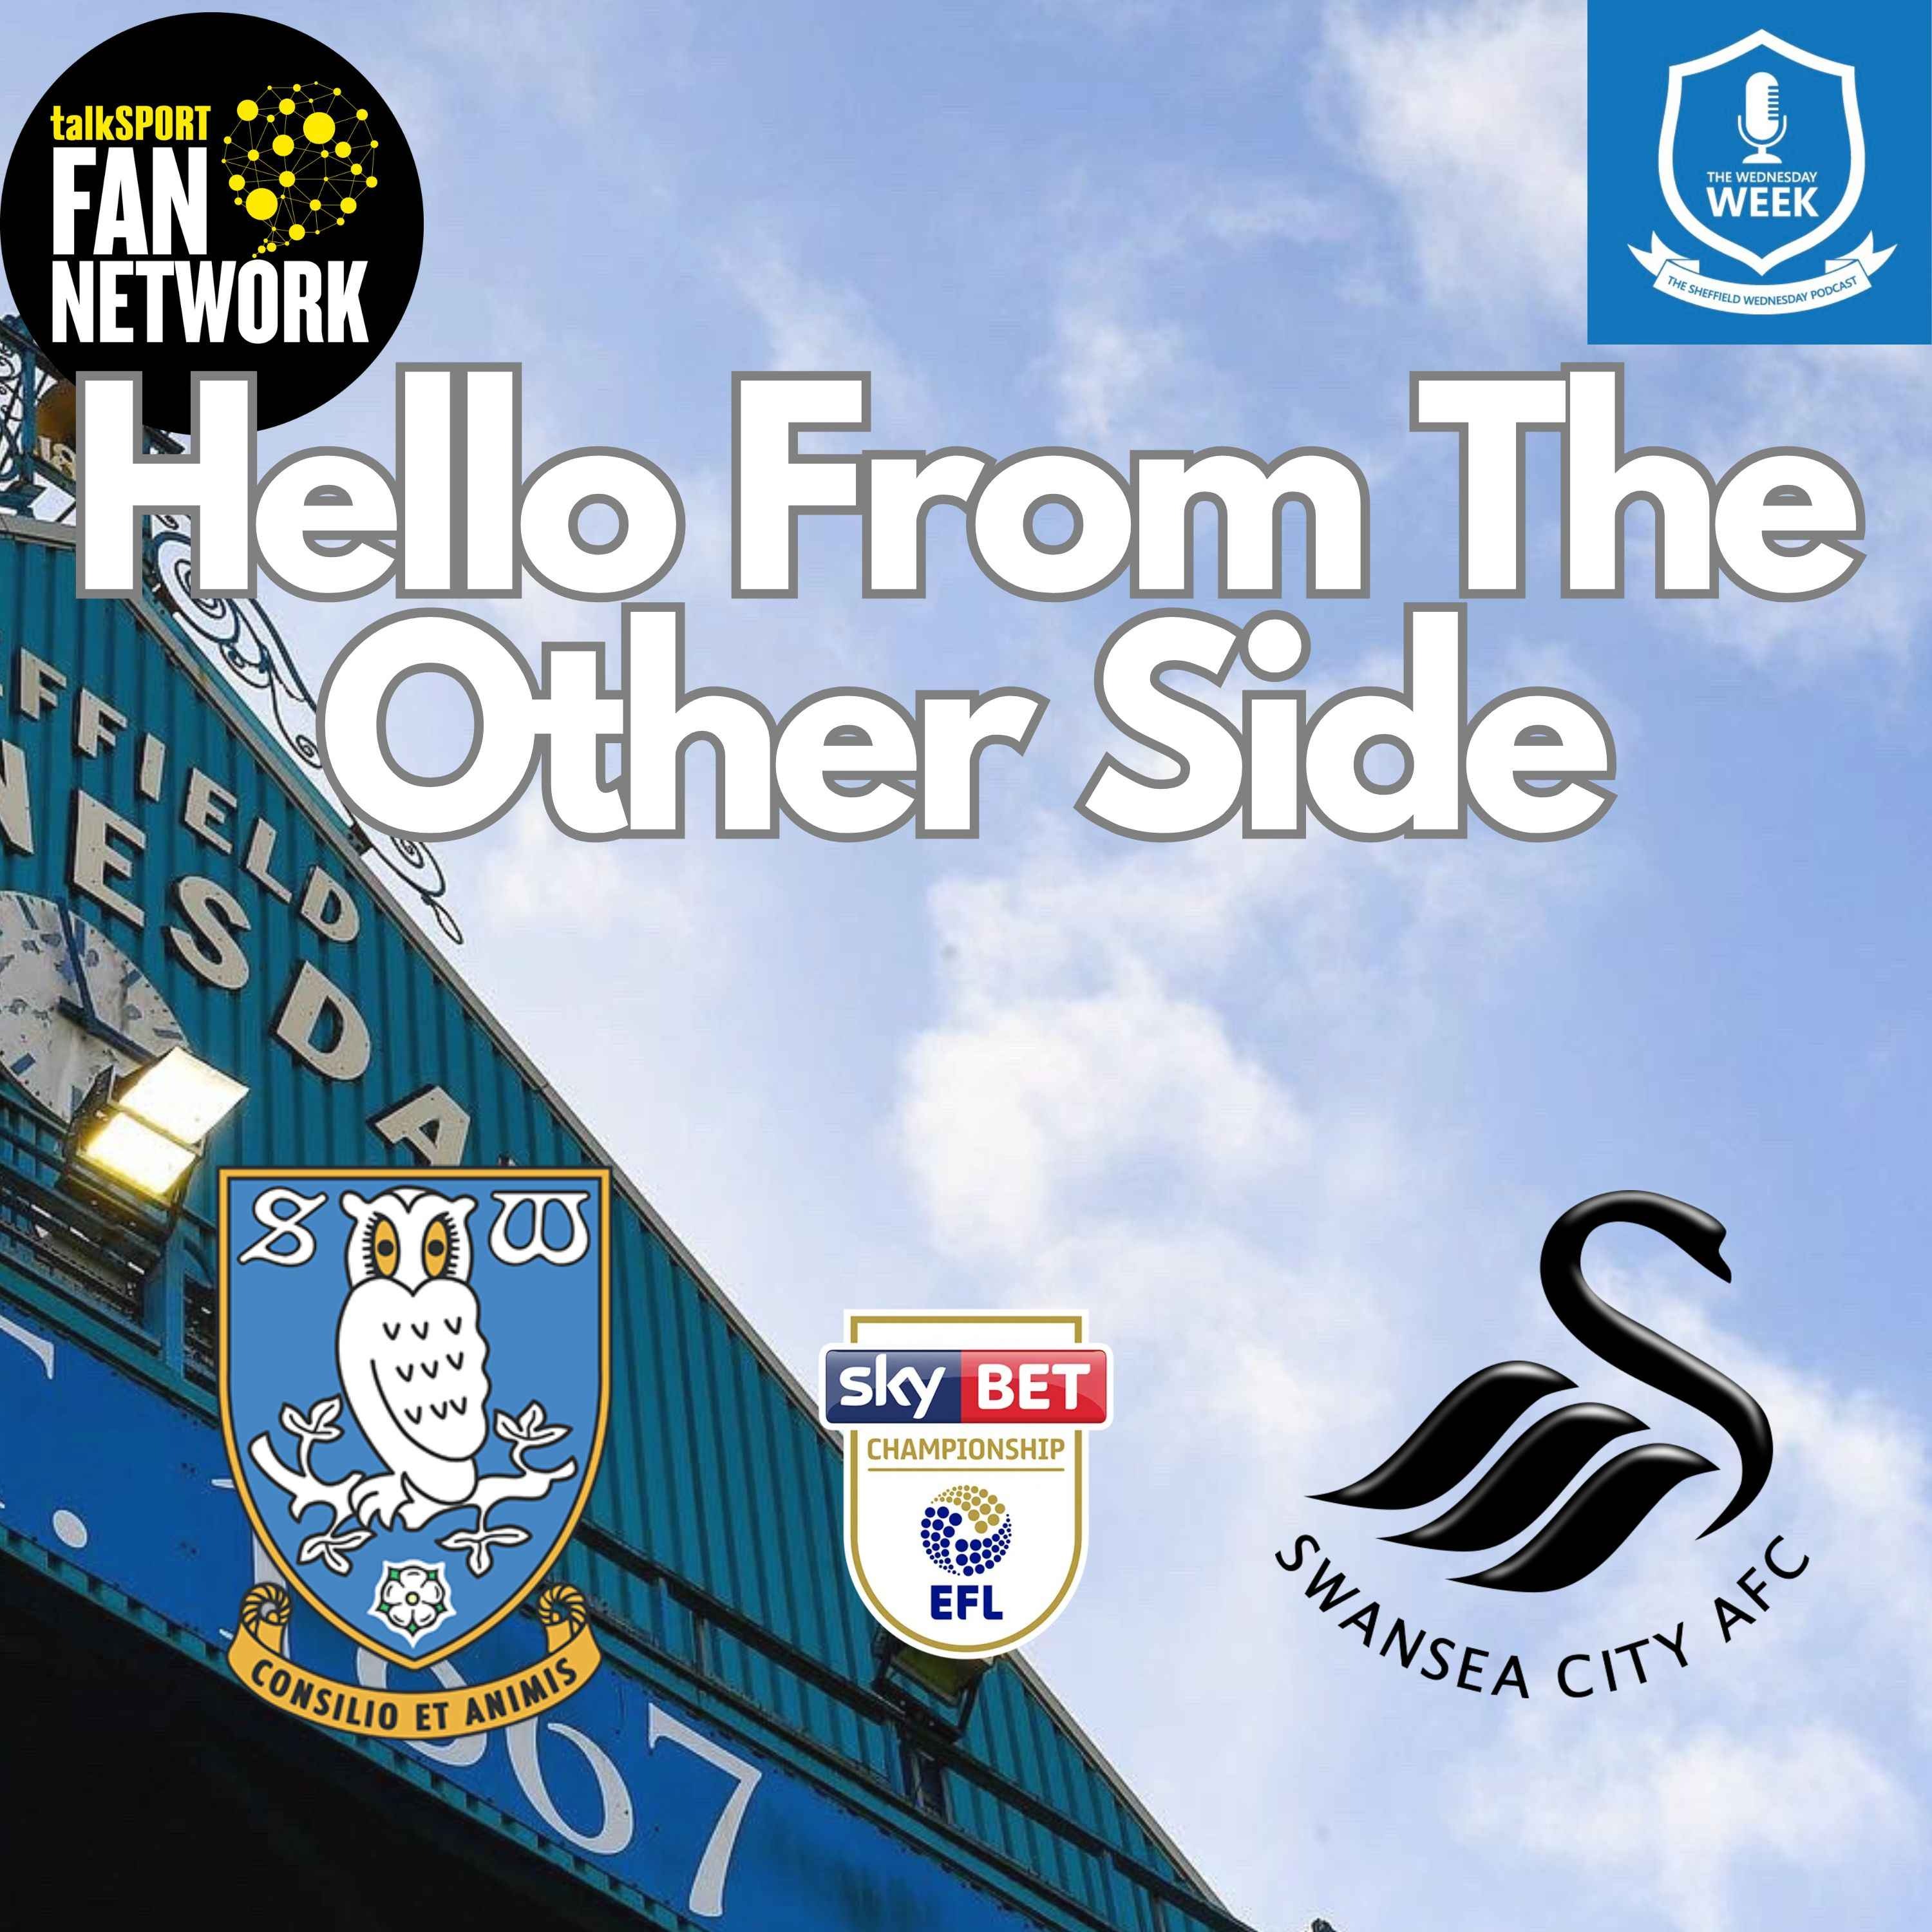 Hello From the Other Side - Swansea City